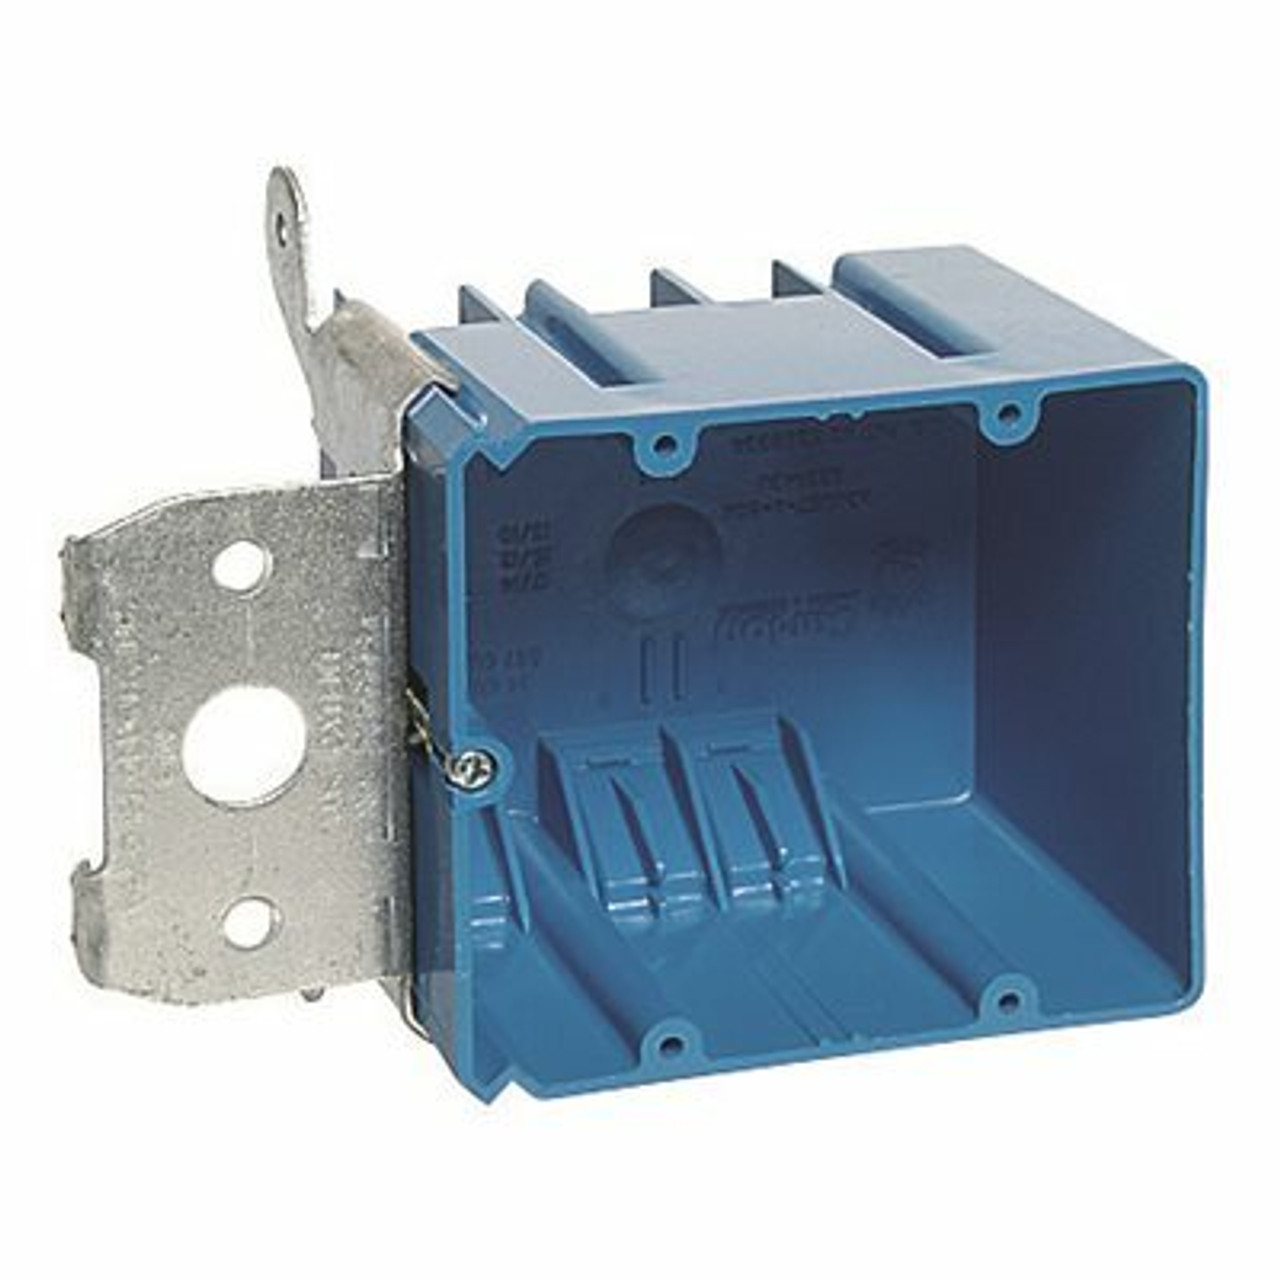 Carlon 2-Gang 34 Cu. In. Adjustable Pvc Electrical Box With Side Clamp